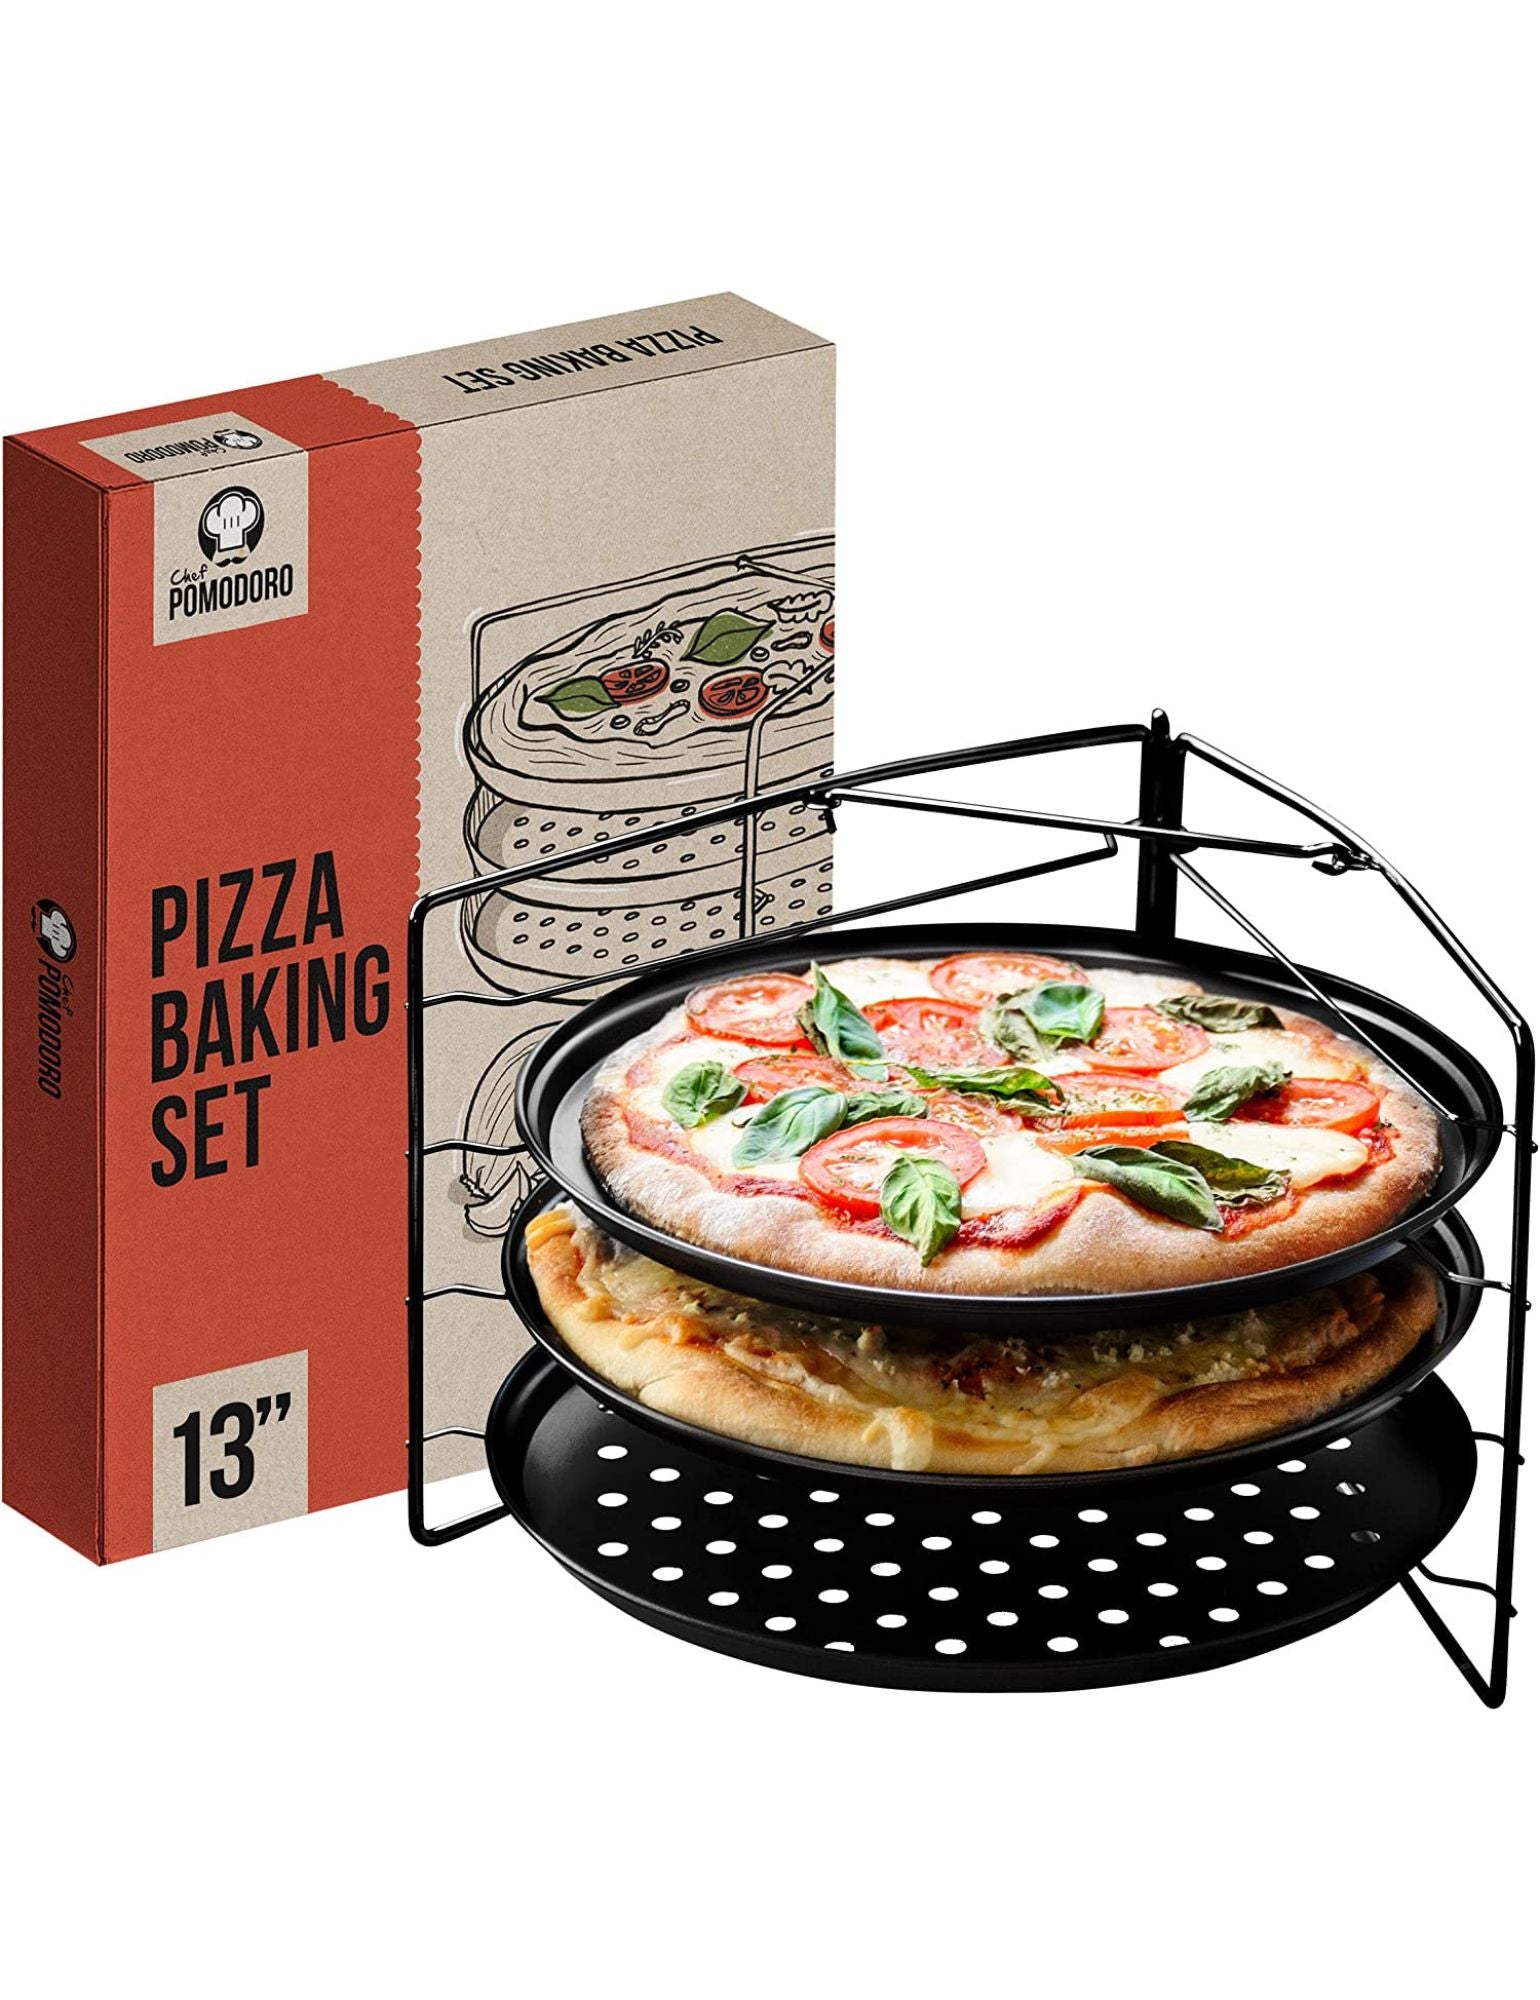 Pizza Baking Set with 3 Pizza Pans and Pizza Rack